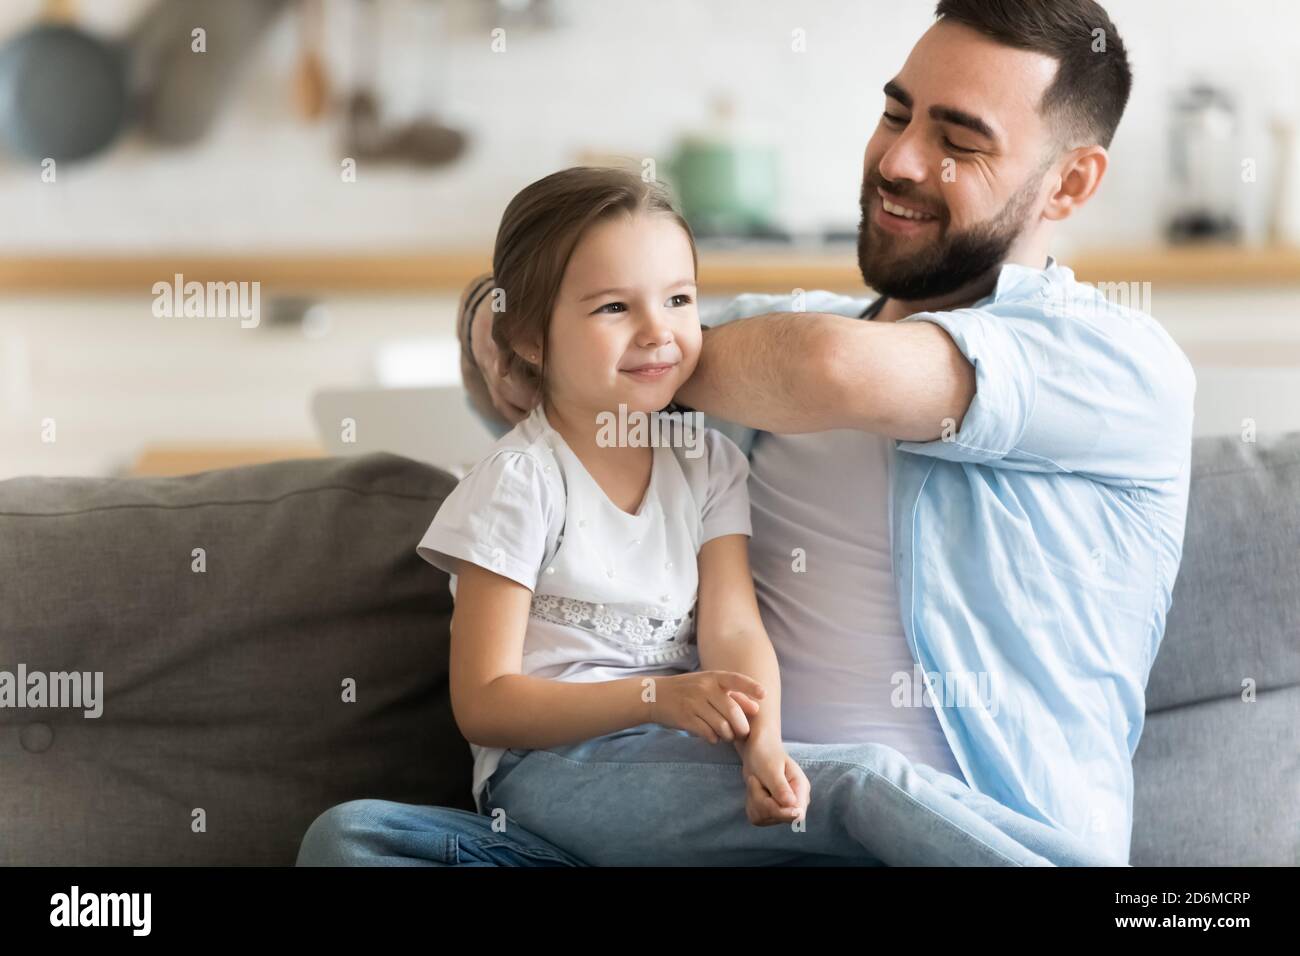 Caring smiling father brushing combing adorable preschool daughter hair Stock Photo